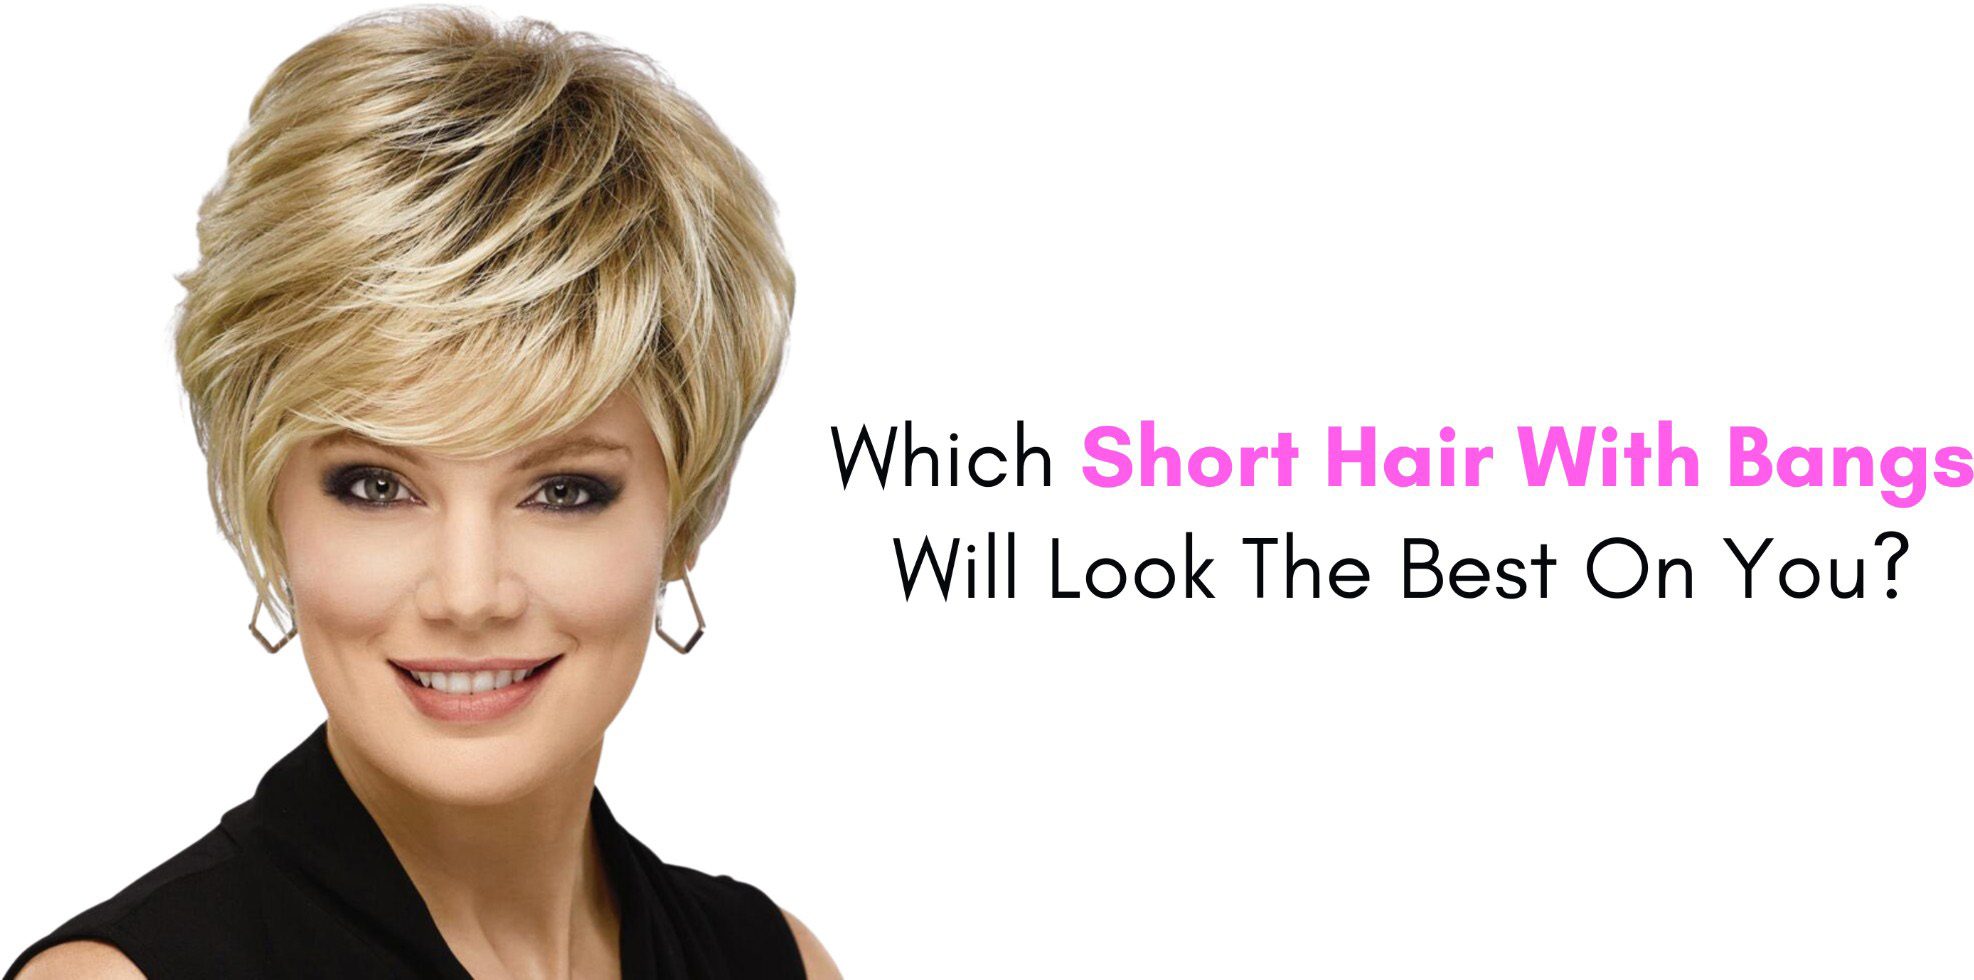 which short hair with bangs will look best